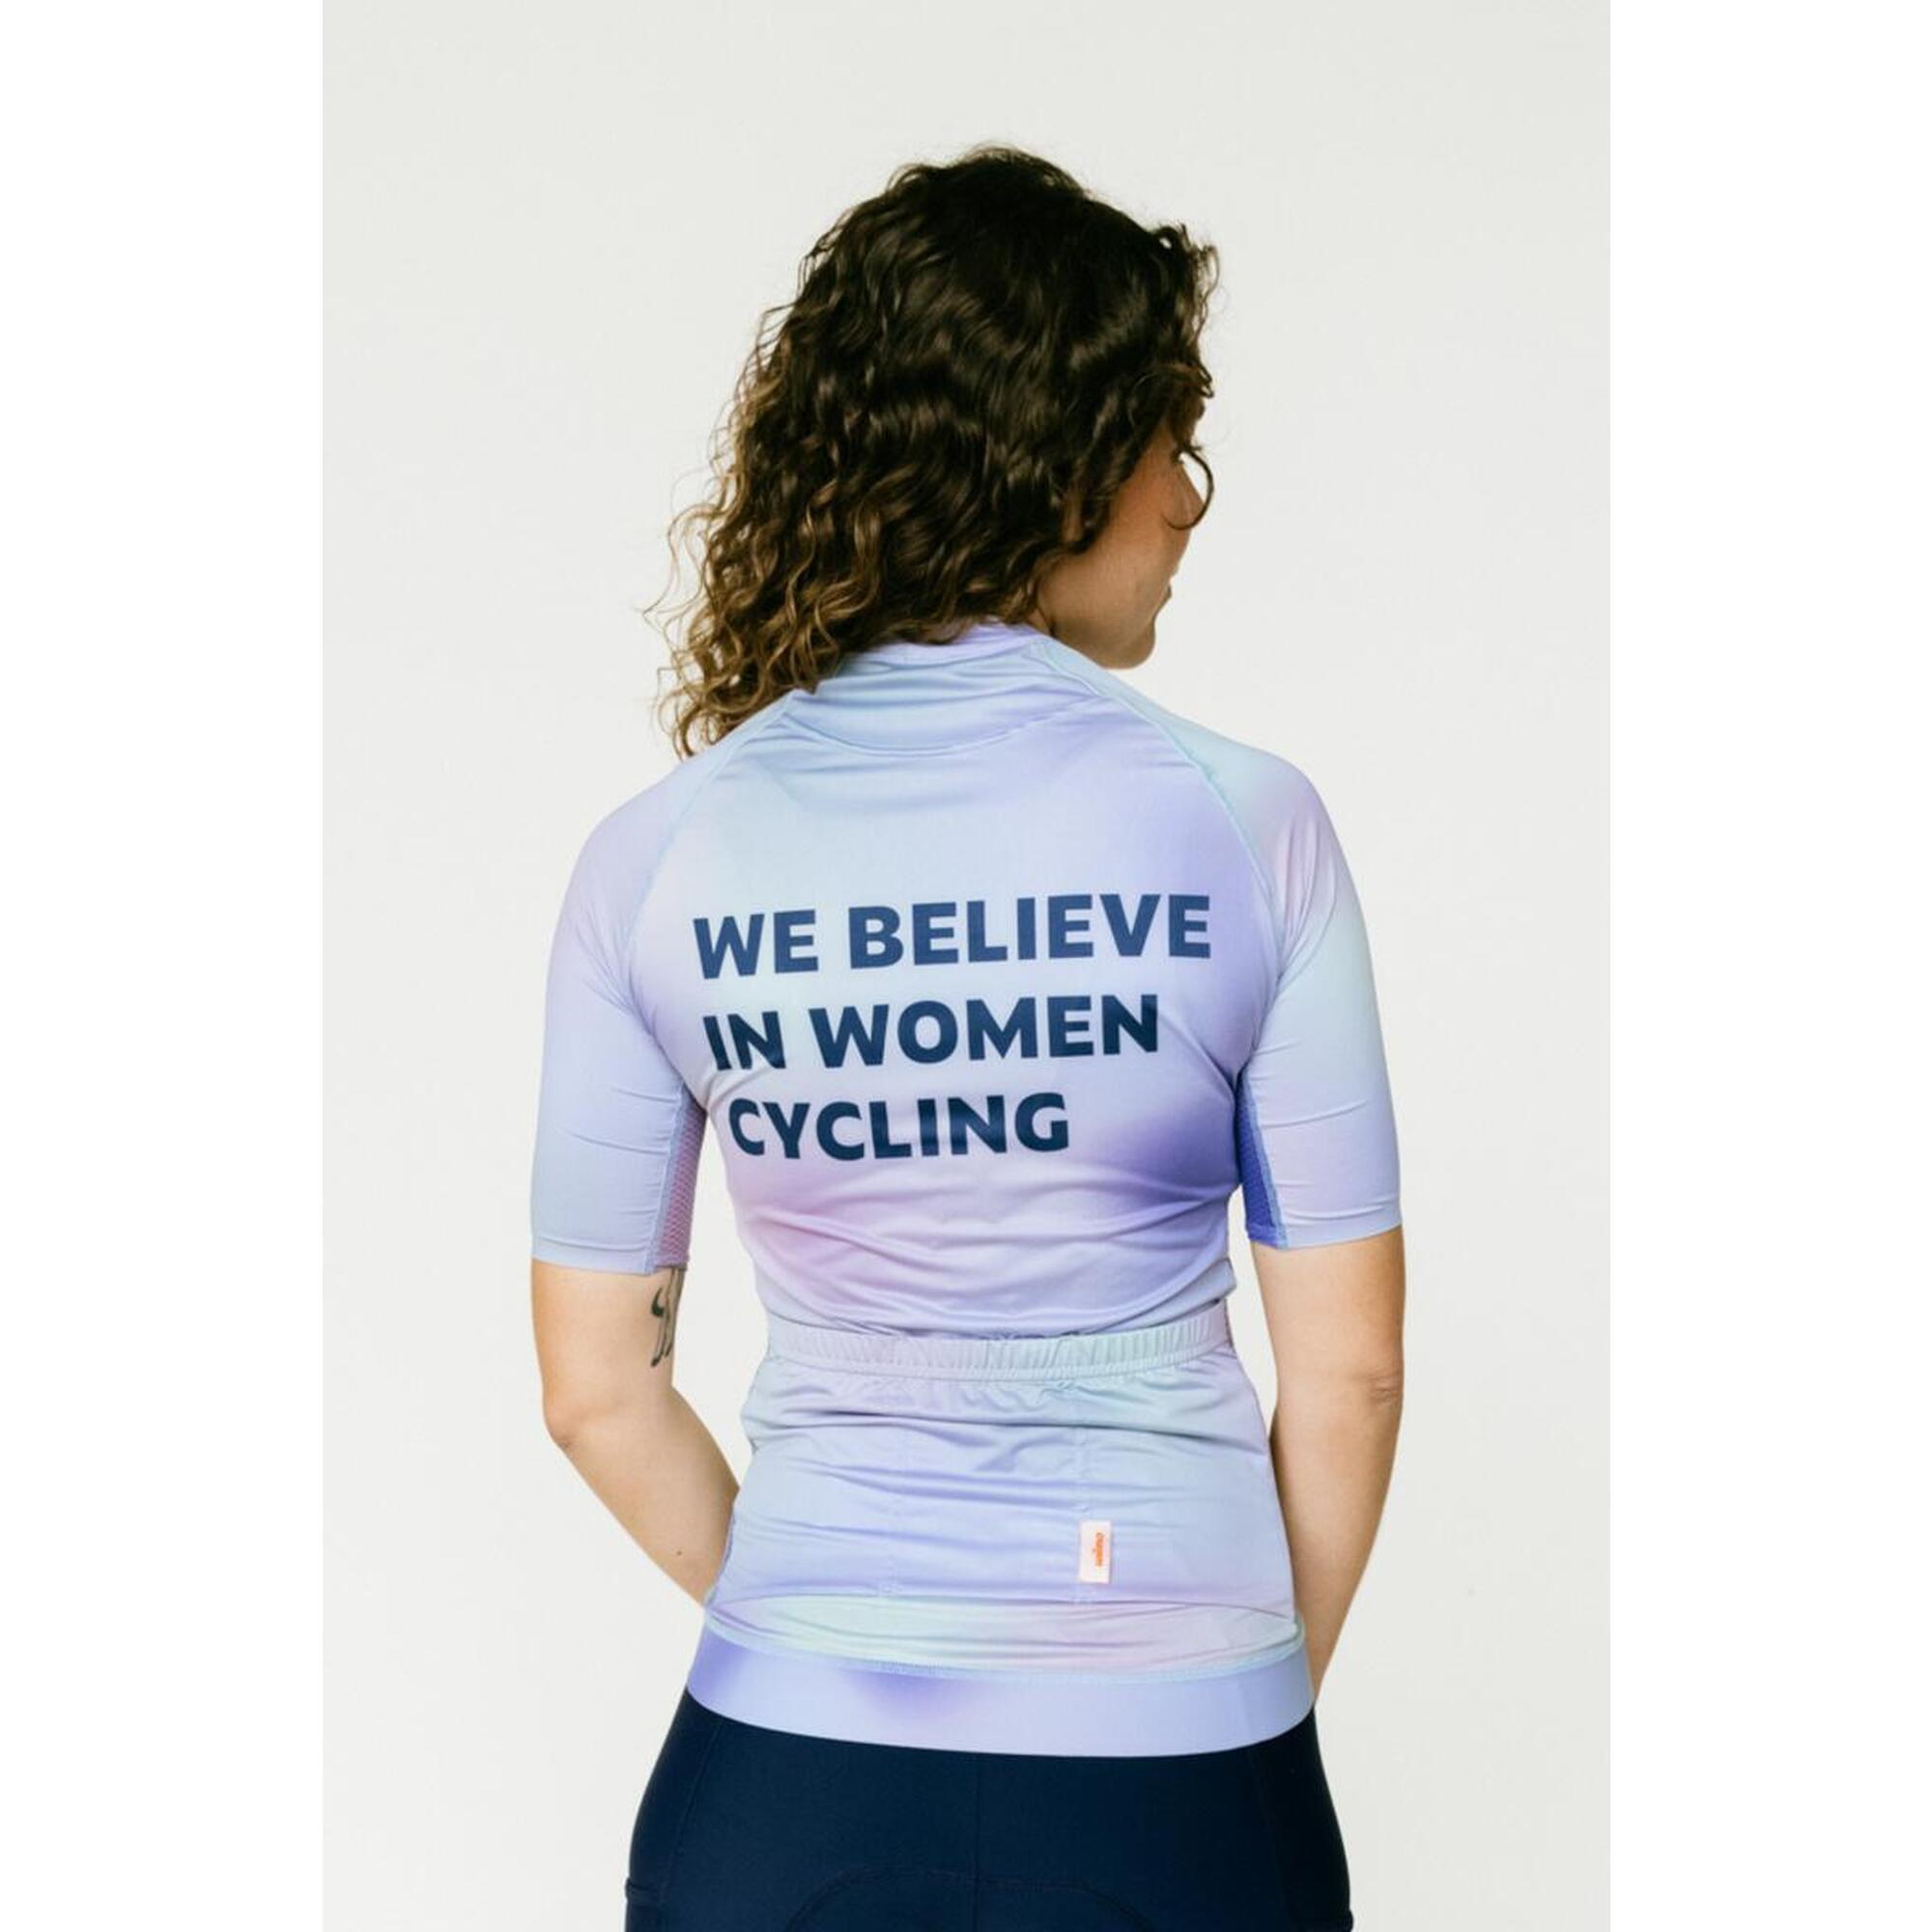 Maillot Cyclisme Femme Manches Courtes Ultra Respirant